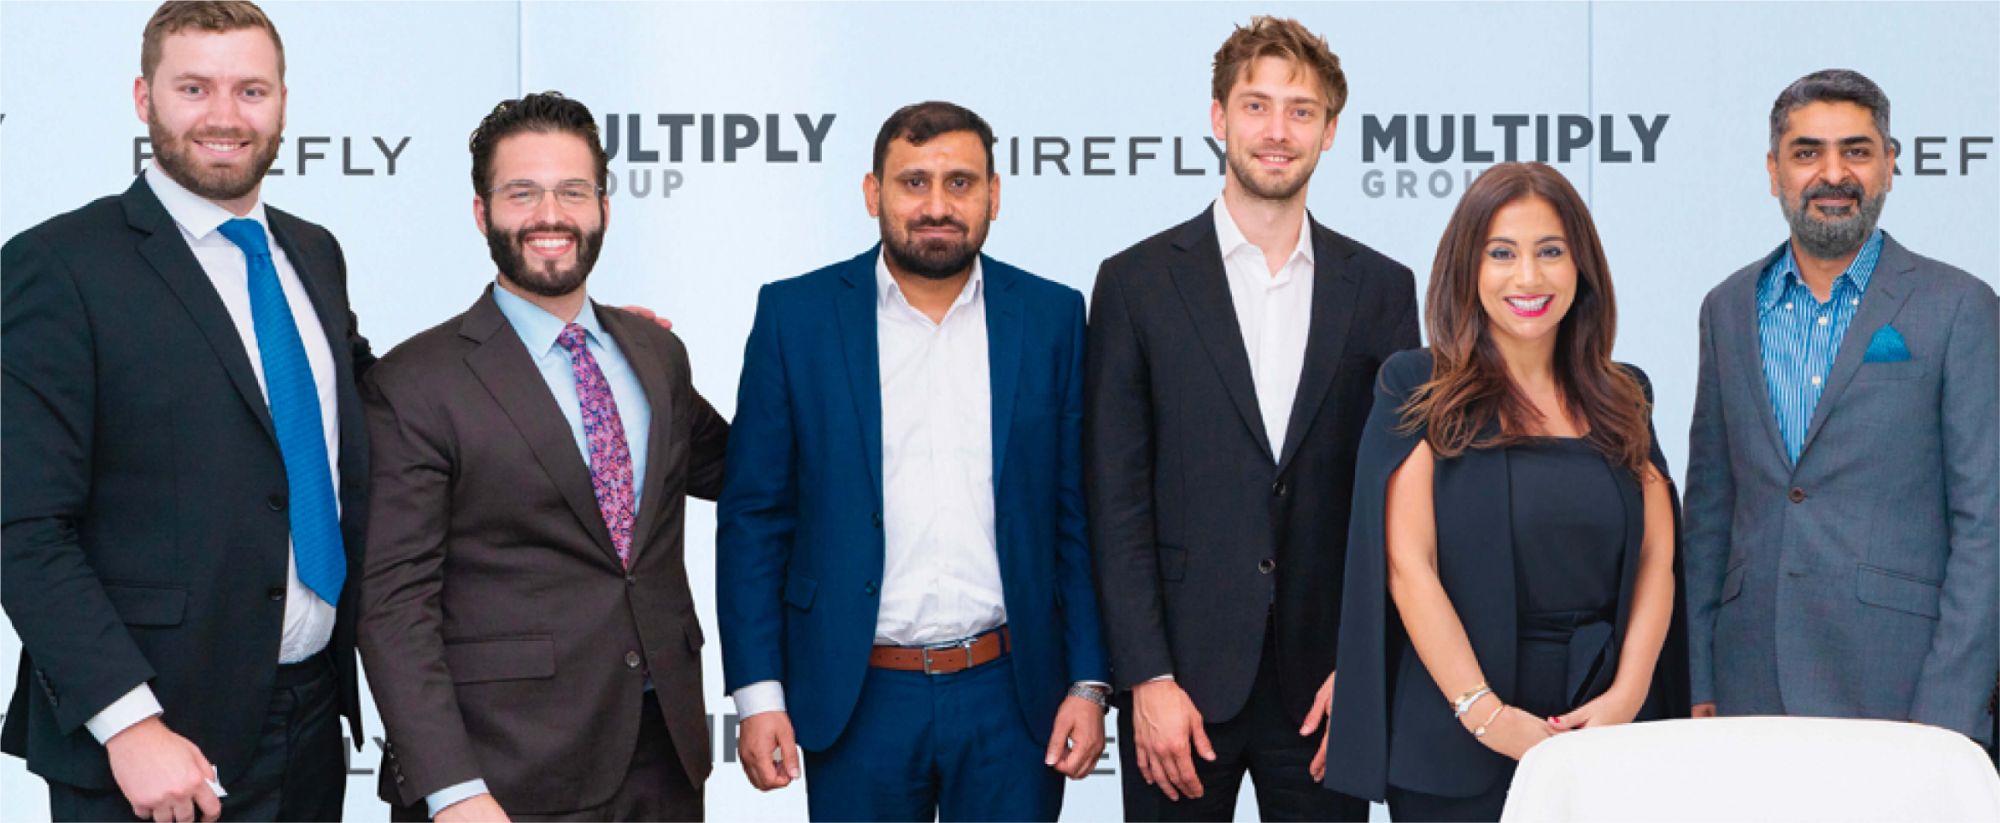 Further investment in Firefly to bring digital advertising services to taxis and rideshares in MENA